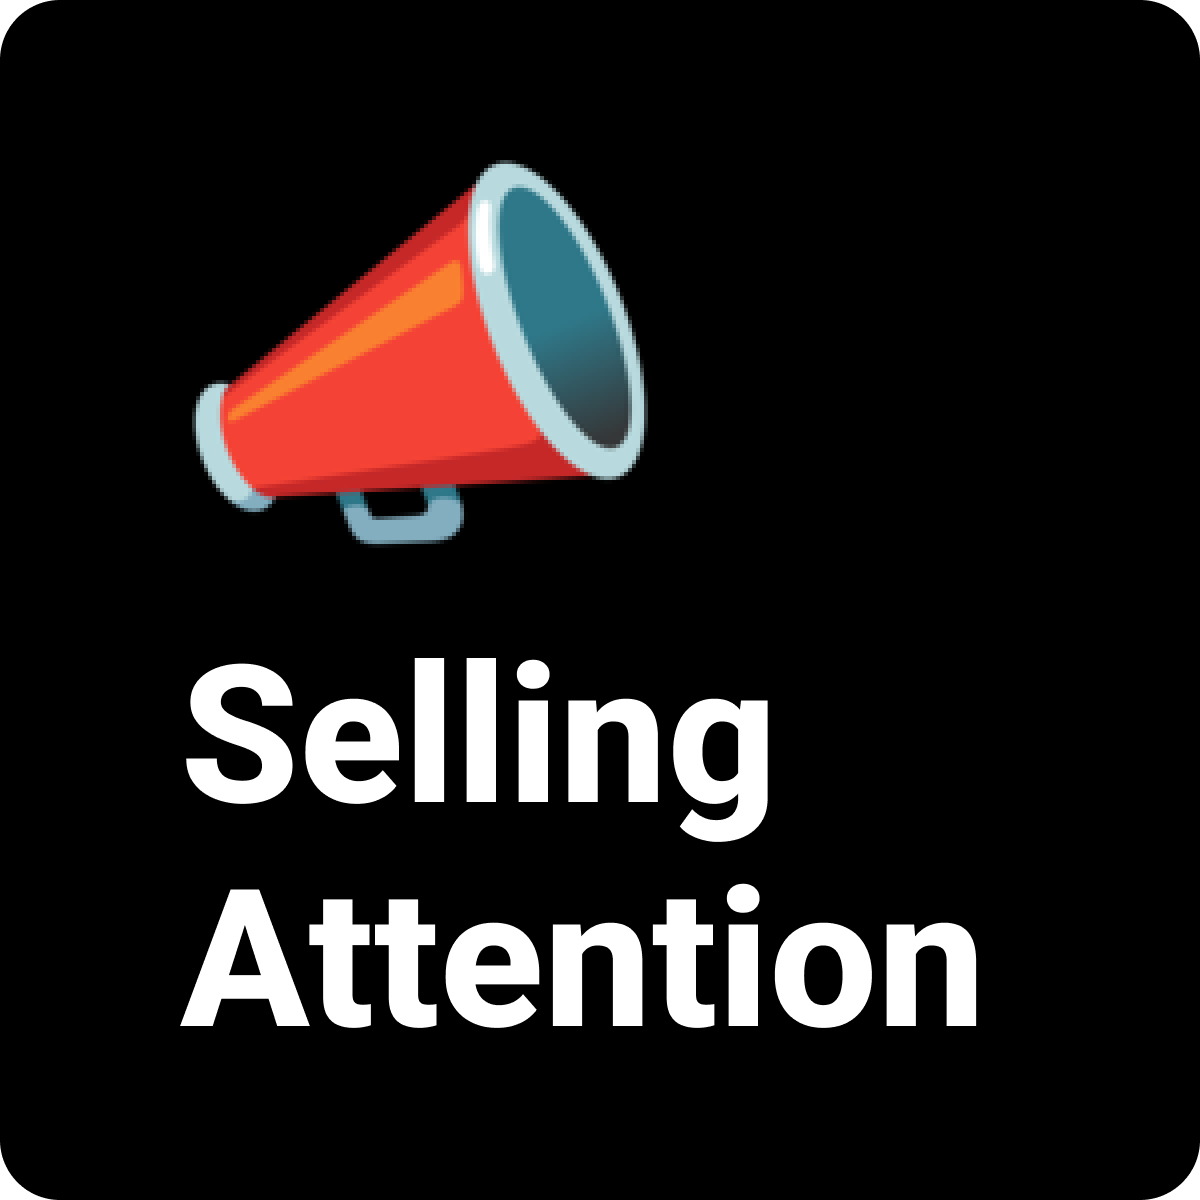 Selling Attention!